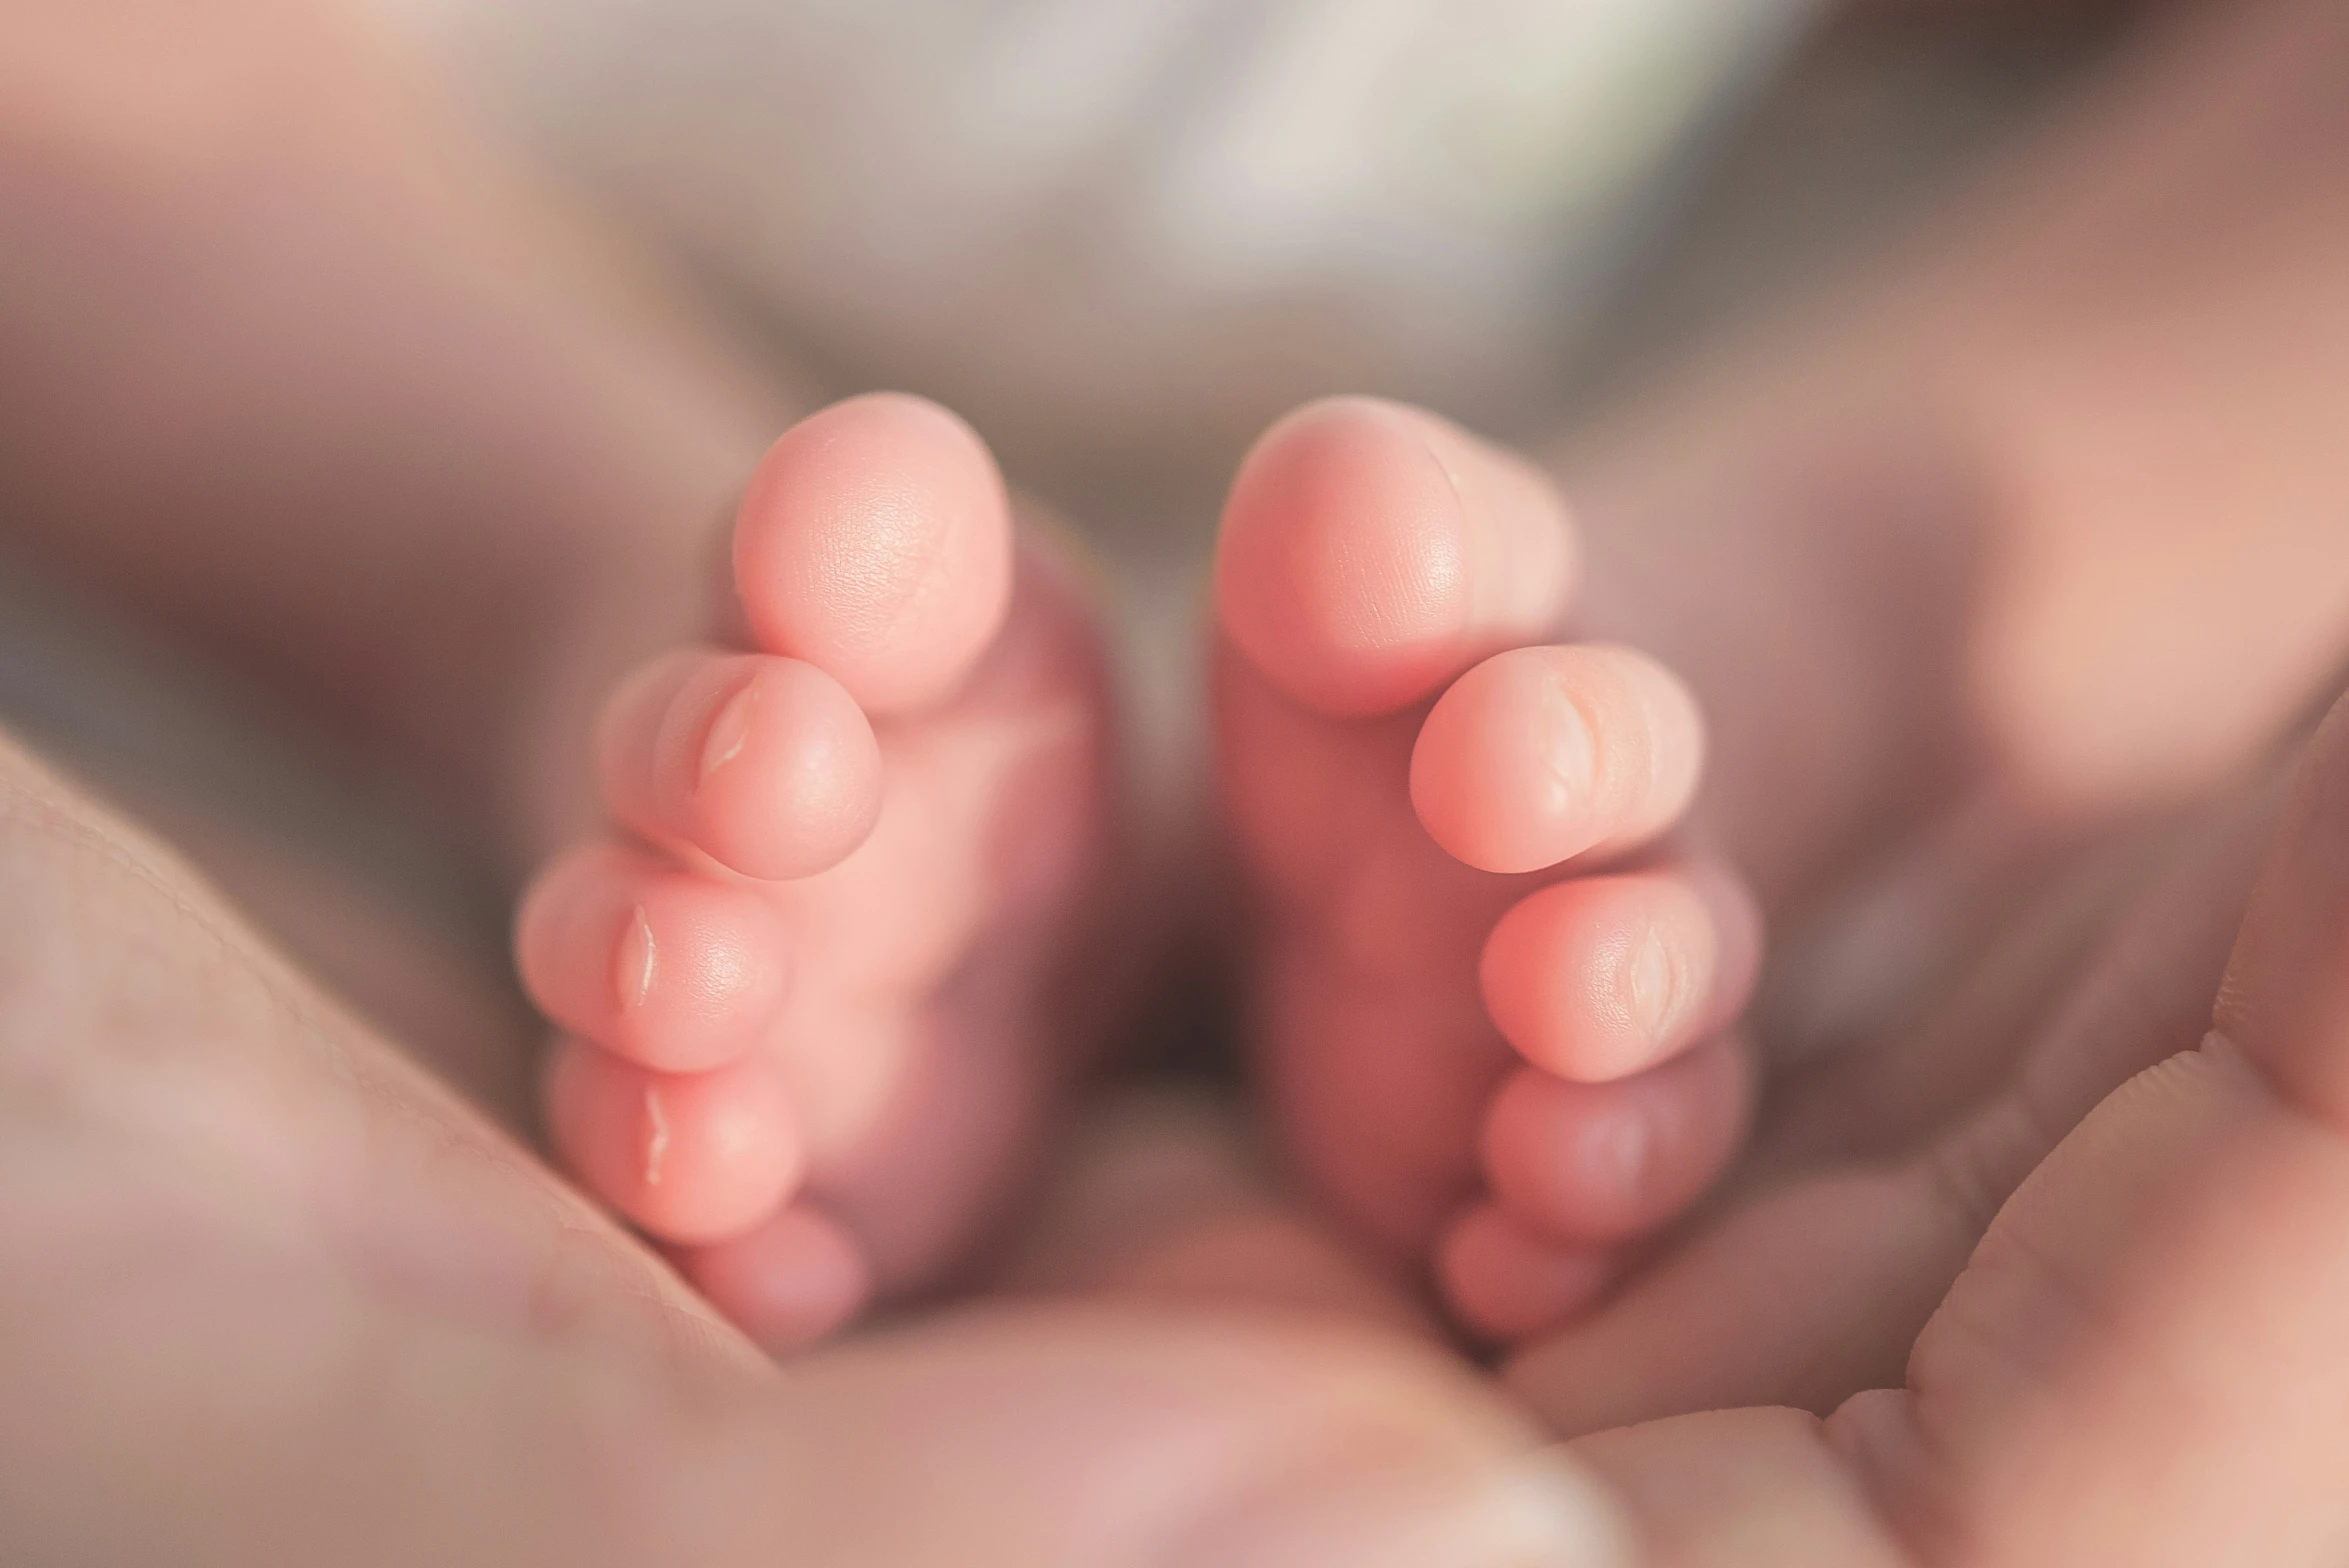 a close up of the feet and hands of two baby feet